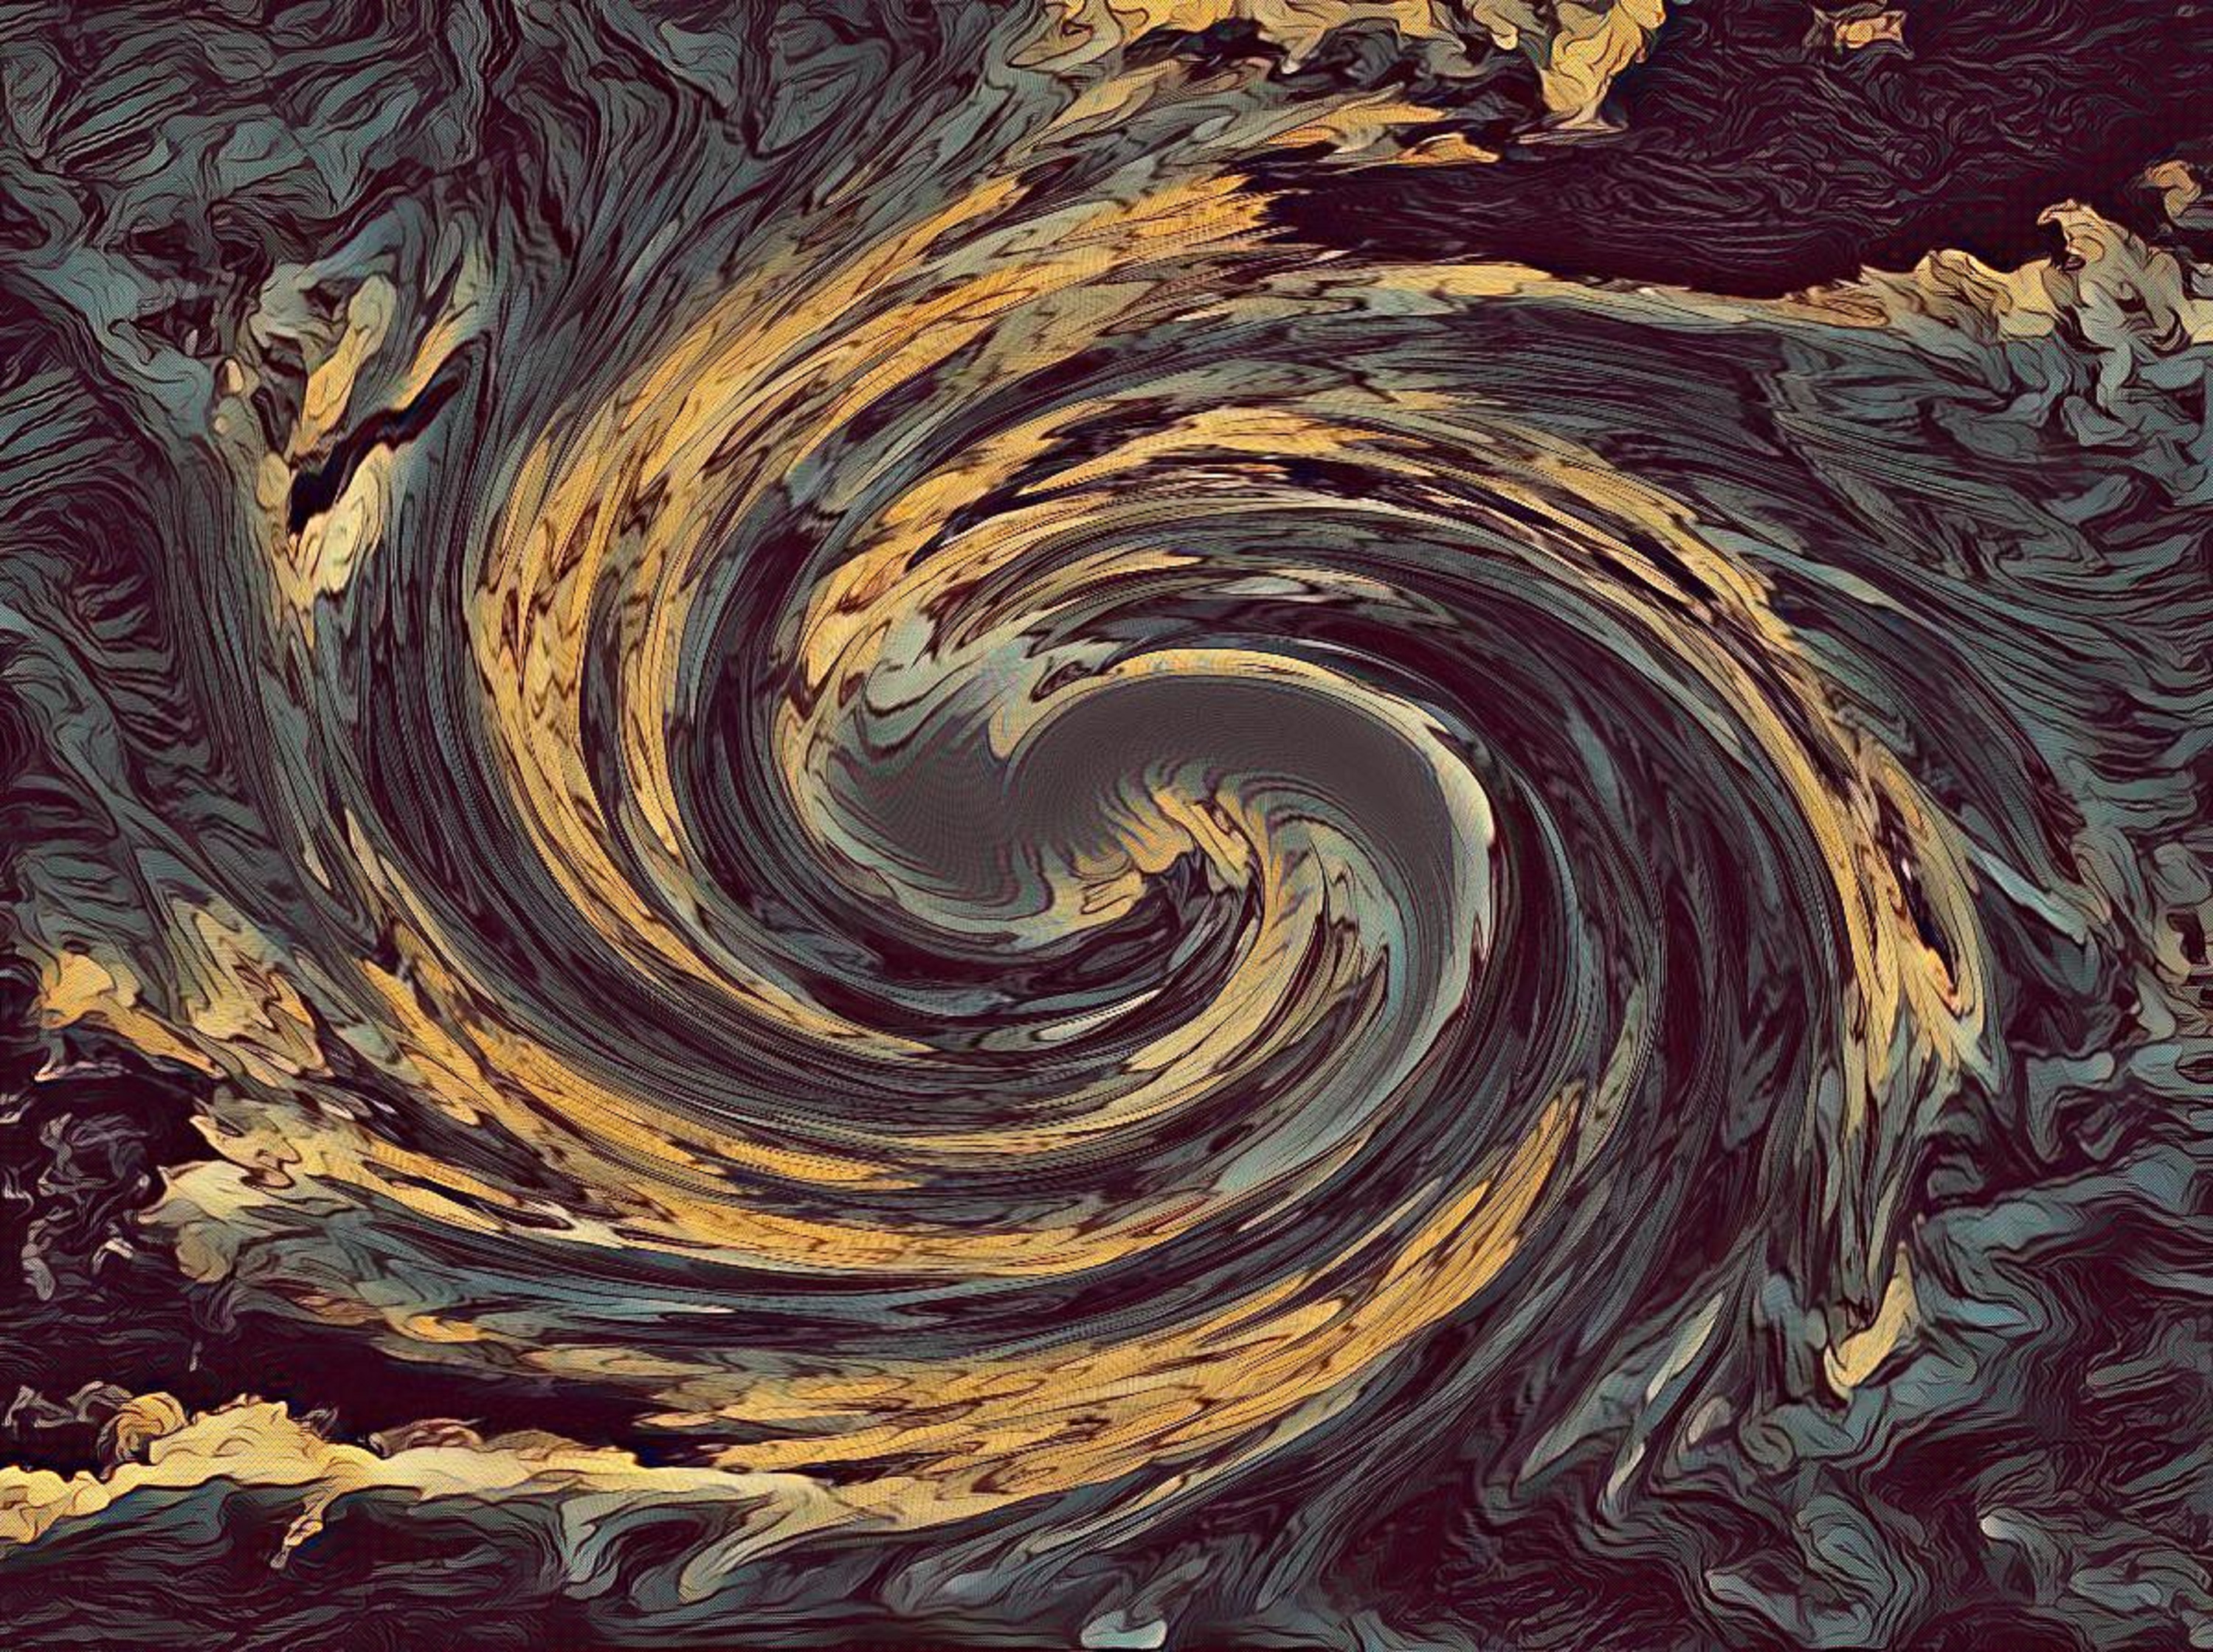 Photo taken  by me with Dark and Swirl effects on LunaPic.com